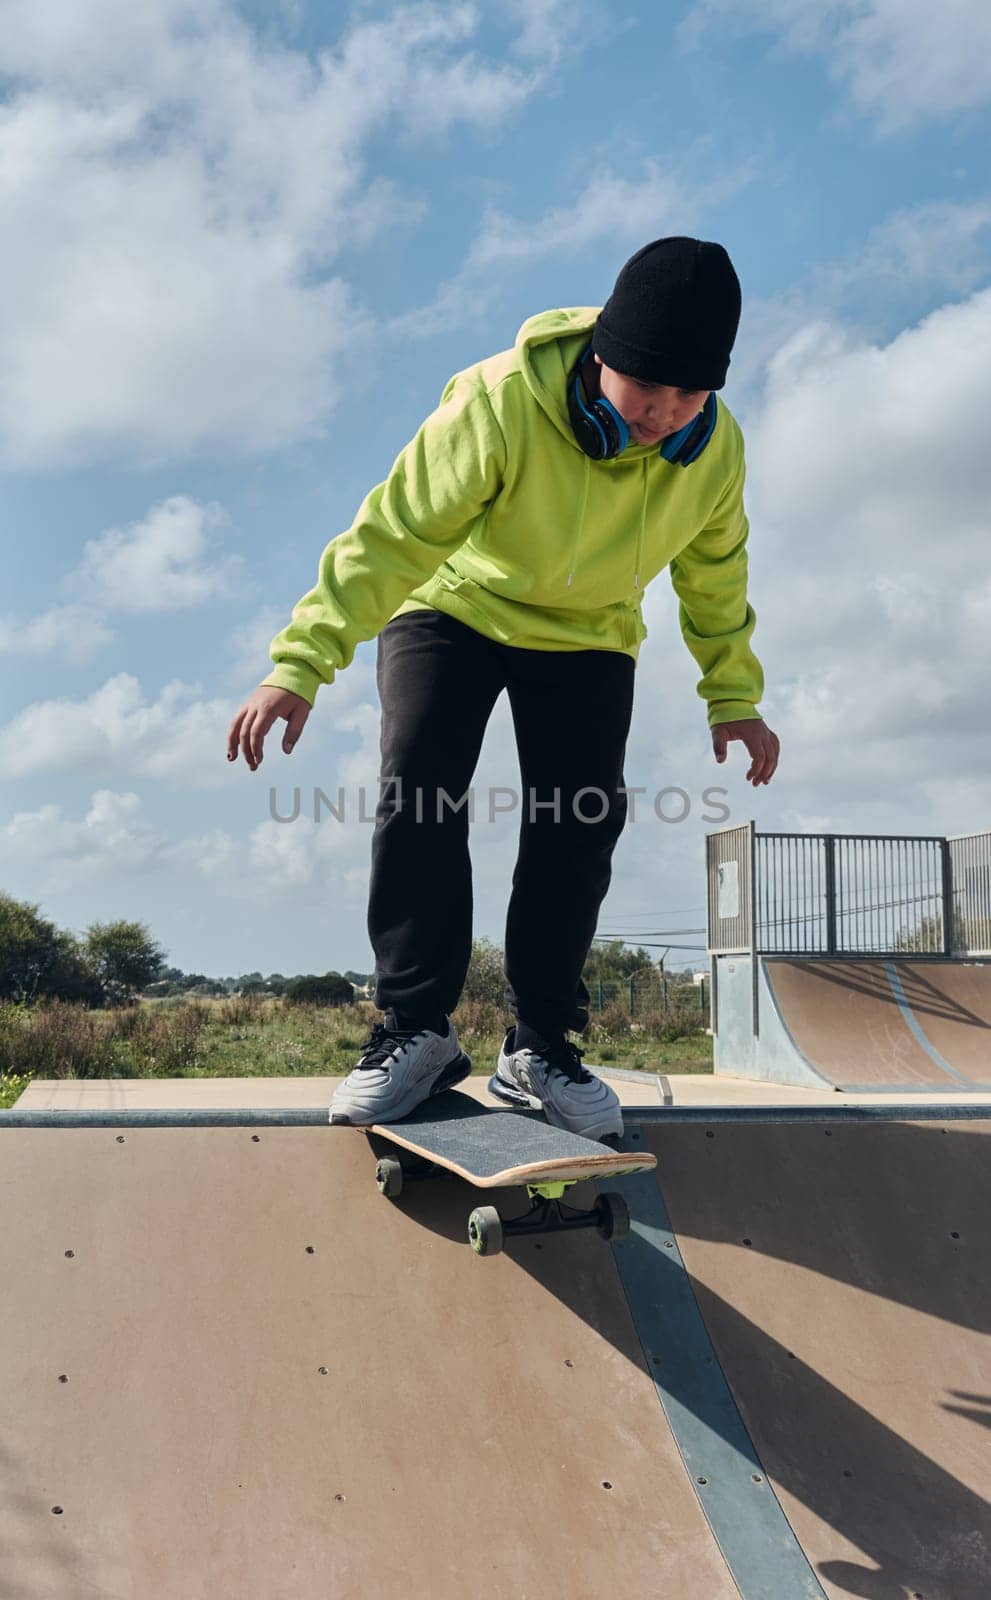 young, teenager, with a skateboard, diving down the slope, on a rink, skateboarding, wearing headphones, green sweatshirt, black hat, swinging, on a sunny day